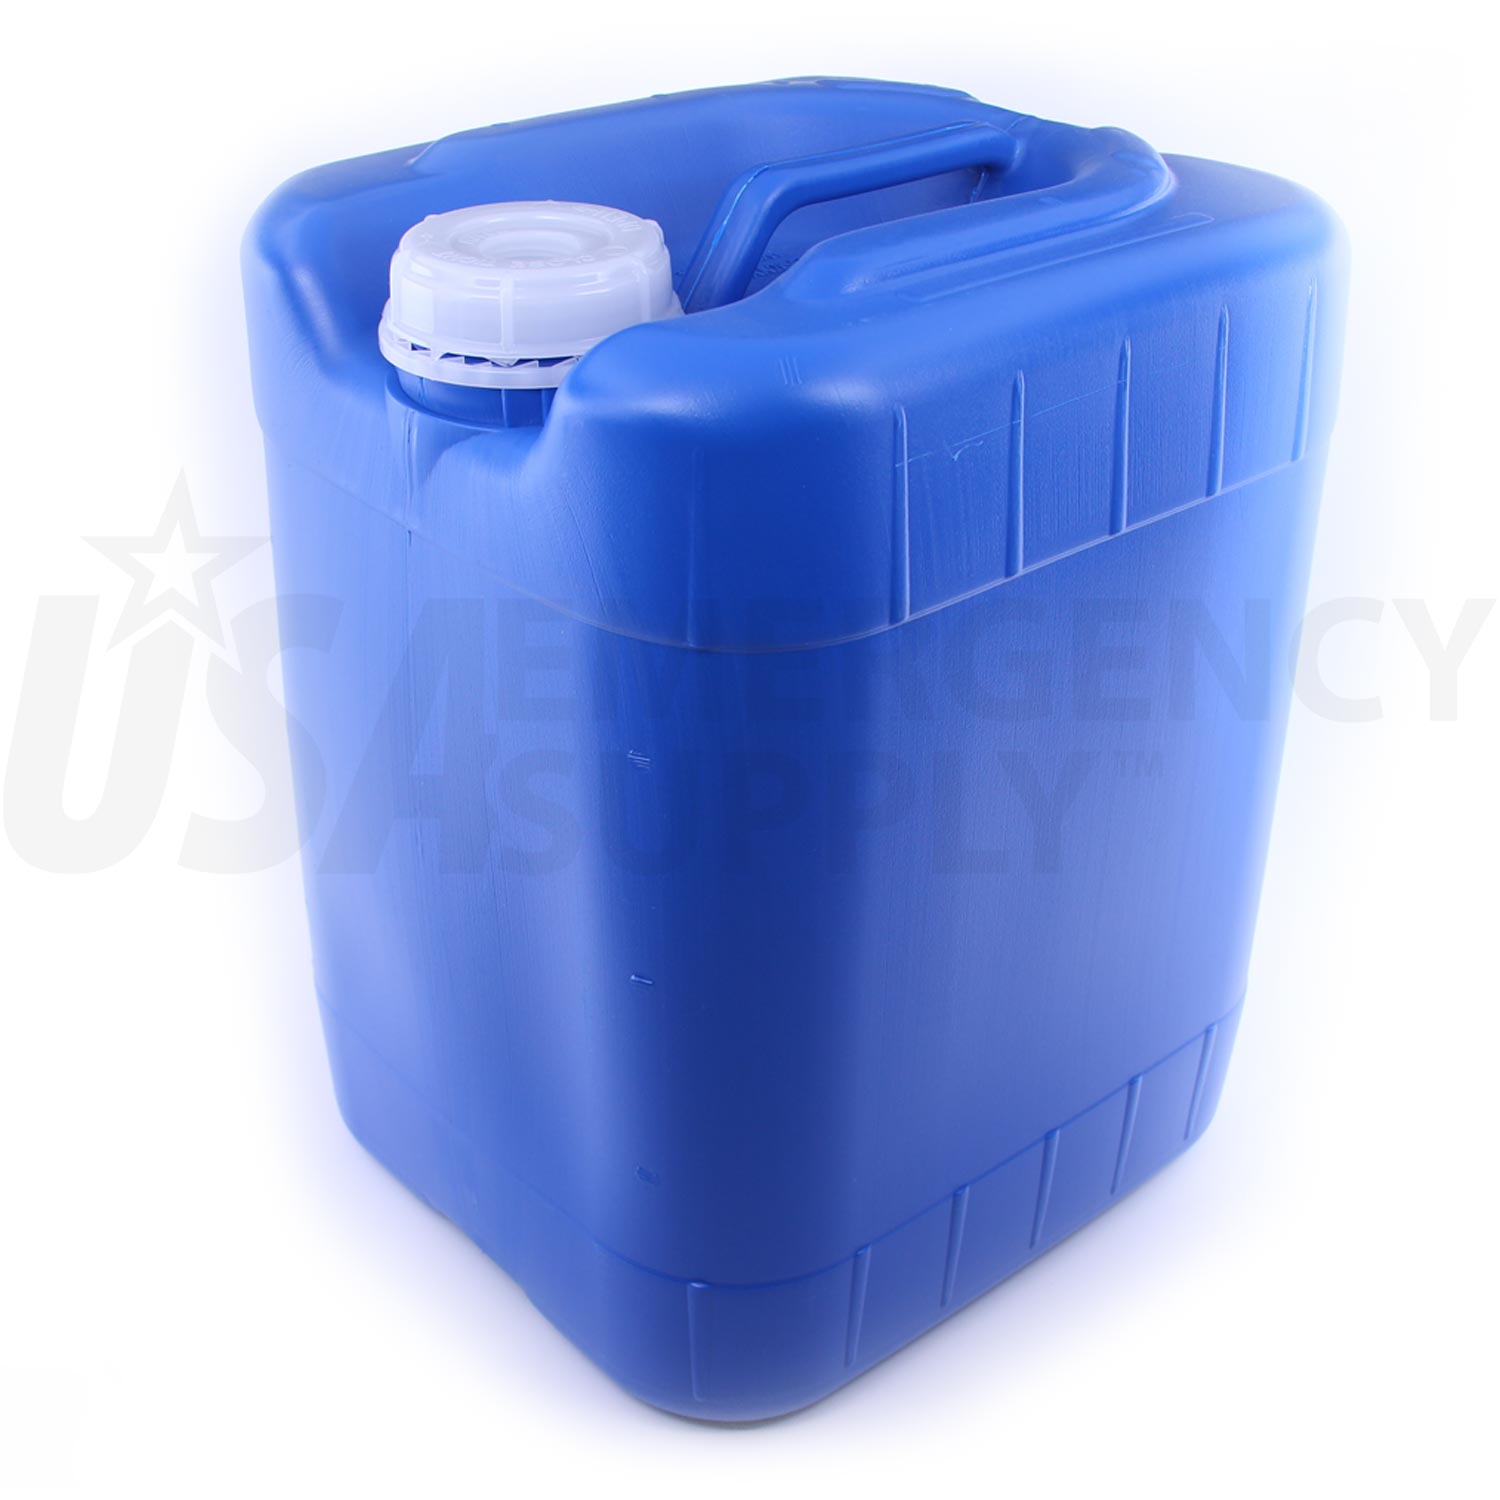 https://www.usaemergencysupply.com/media/img/products/lg/5-gallon-sampson-stackable-water-container-c-lg.jpg